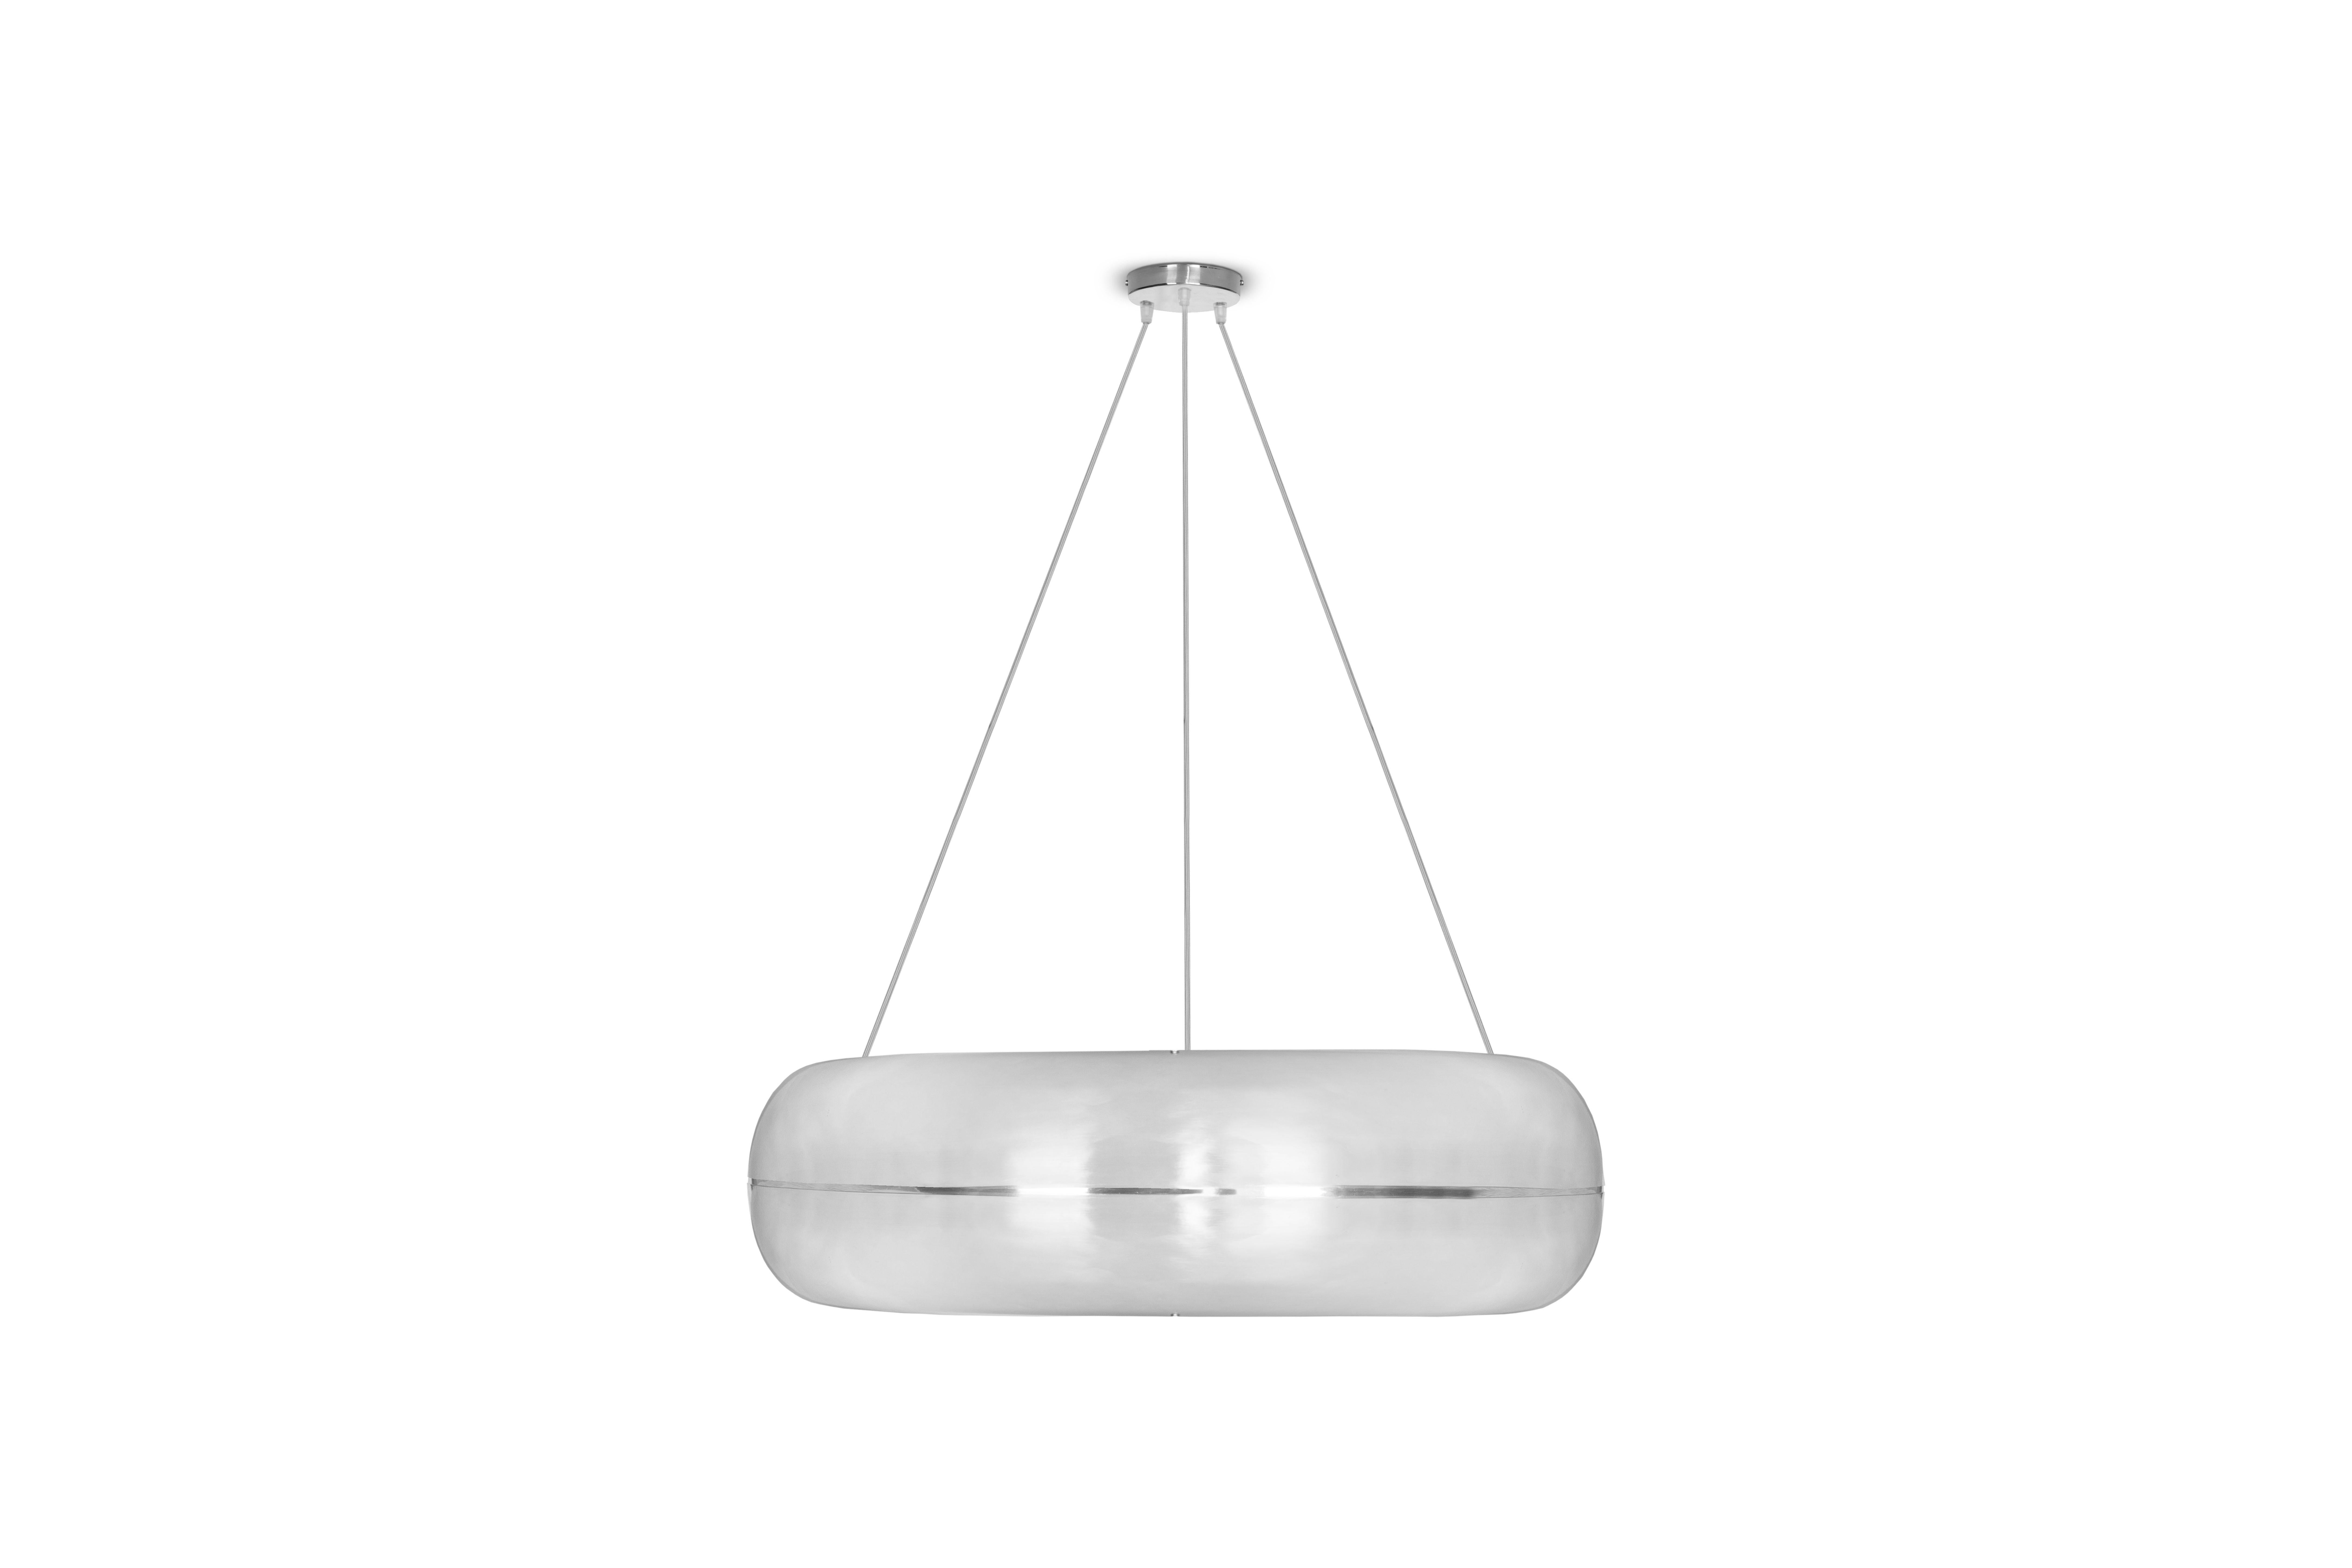 Marshmallow ceiling lamp - Royal Stranger
Dimensions: 17 x 57 x 57 cm 
Sizes for each element. The total height is adjustable.
Material: Brass (also available in Copper or Stainless Steel in polished or brushed finish.).

Composed by three